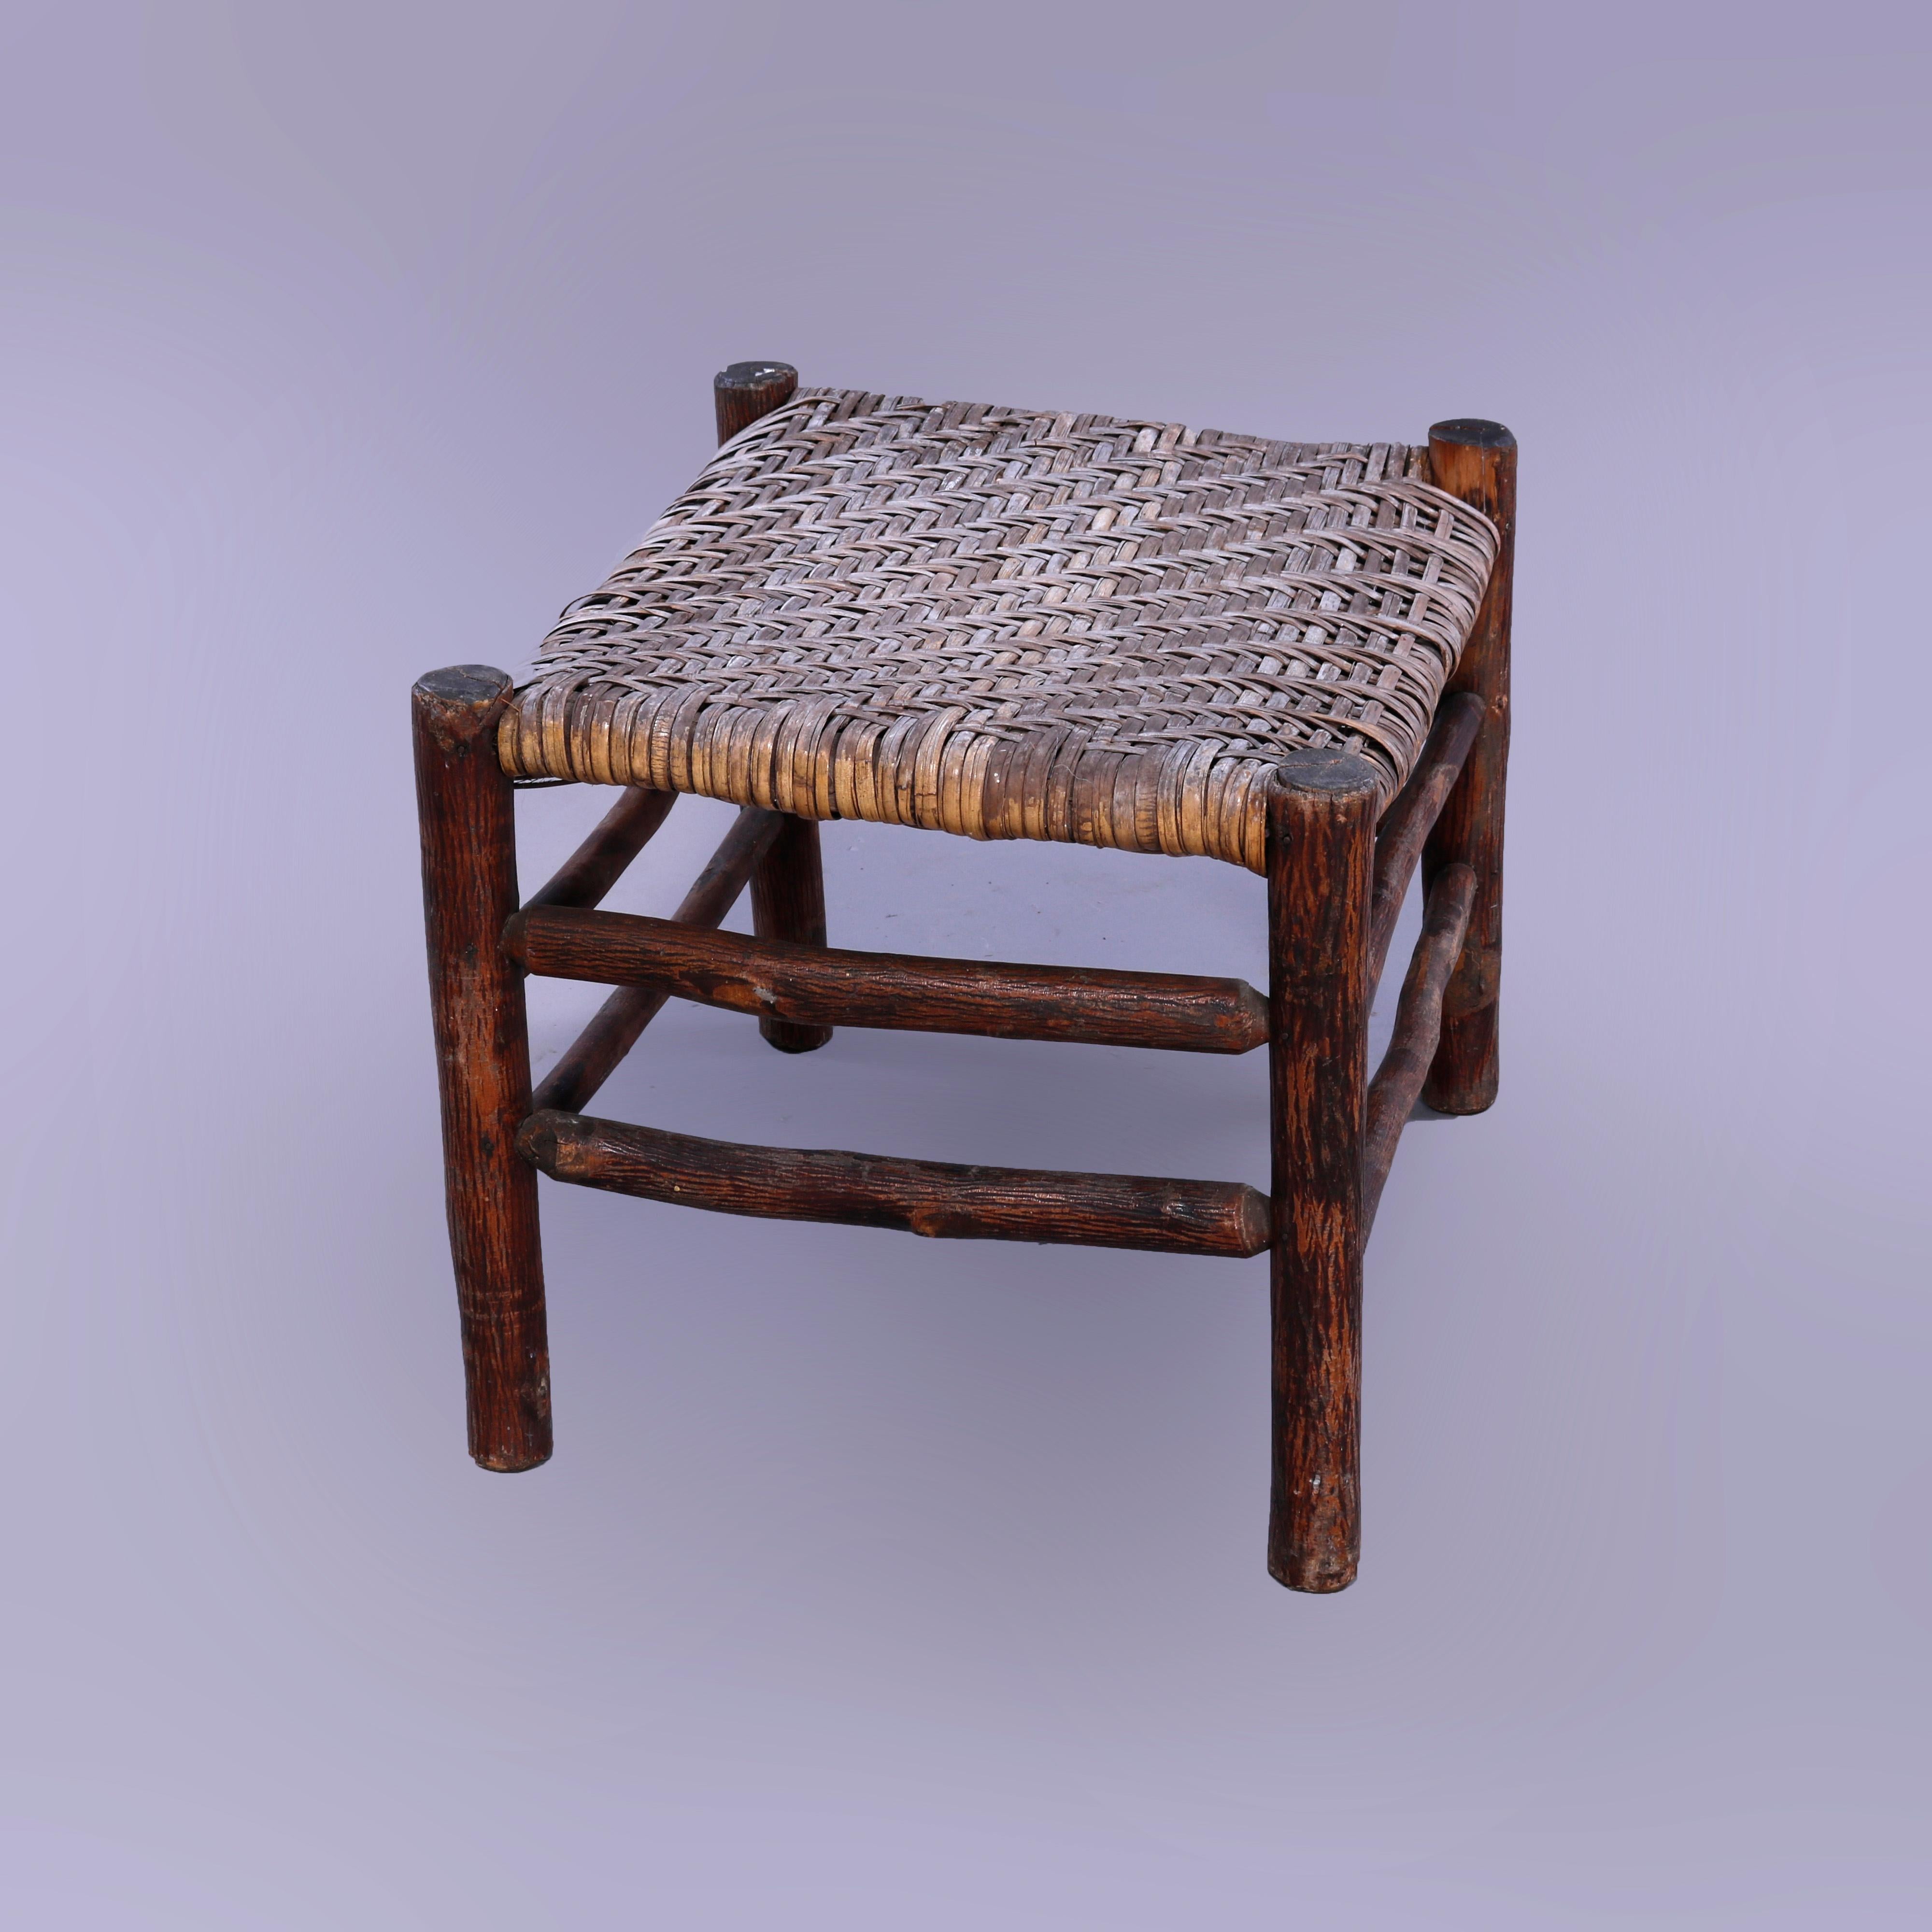 An antique Adirondack bench in the manner of Old Hickory offers woven splint seat on stick form frame, unsigned, c1910

Measures - 16'' H x 22'' W x 17.5'' D.